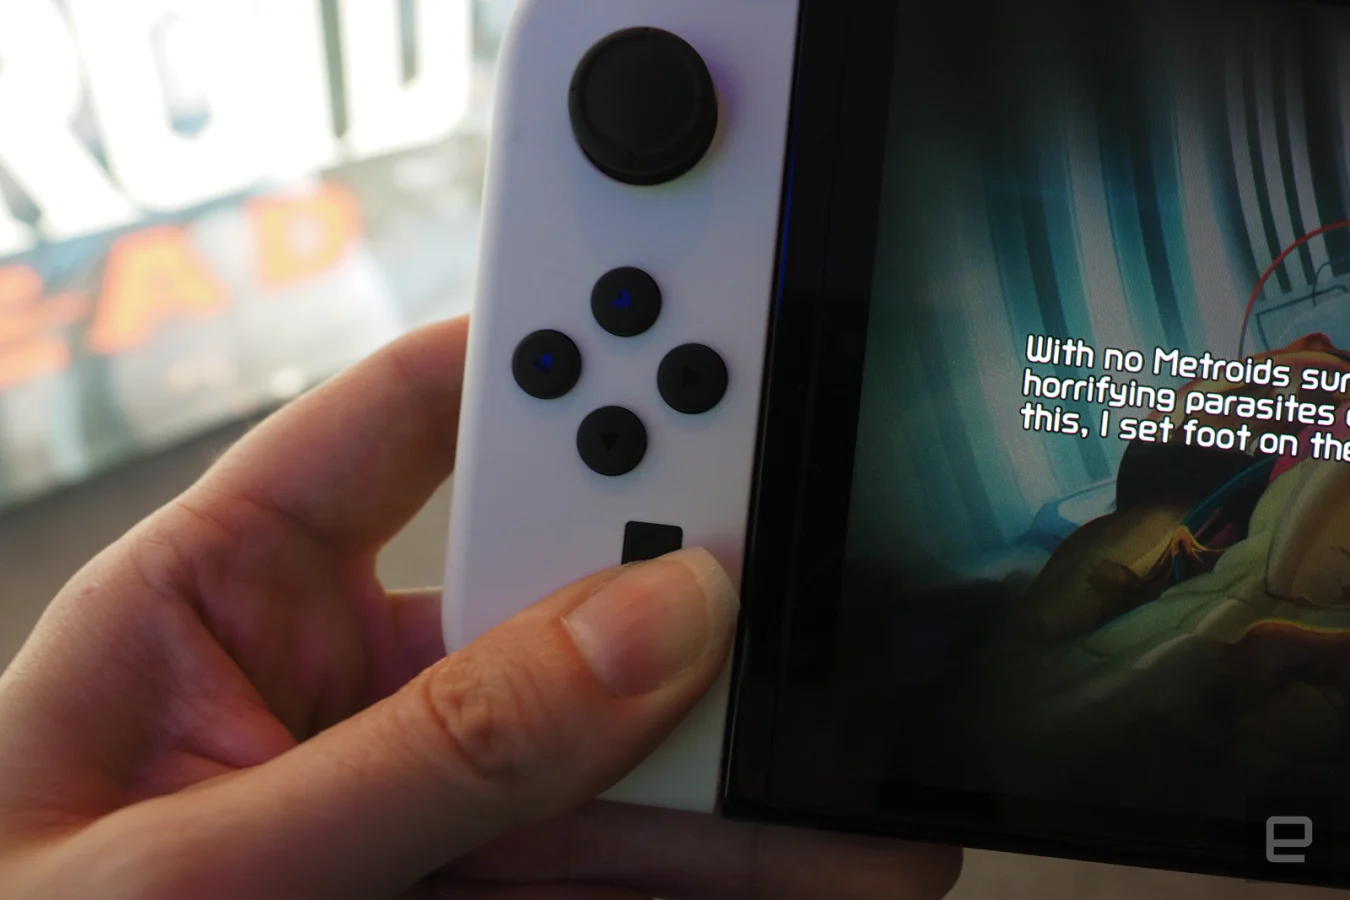 Left Joy-Con with screen and hand visible